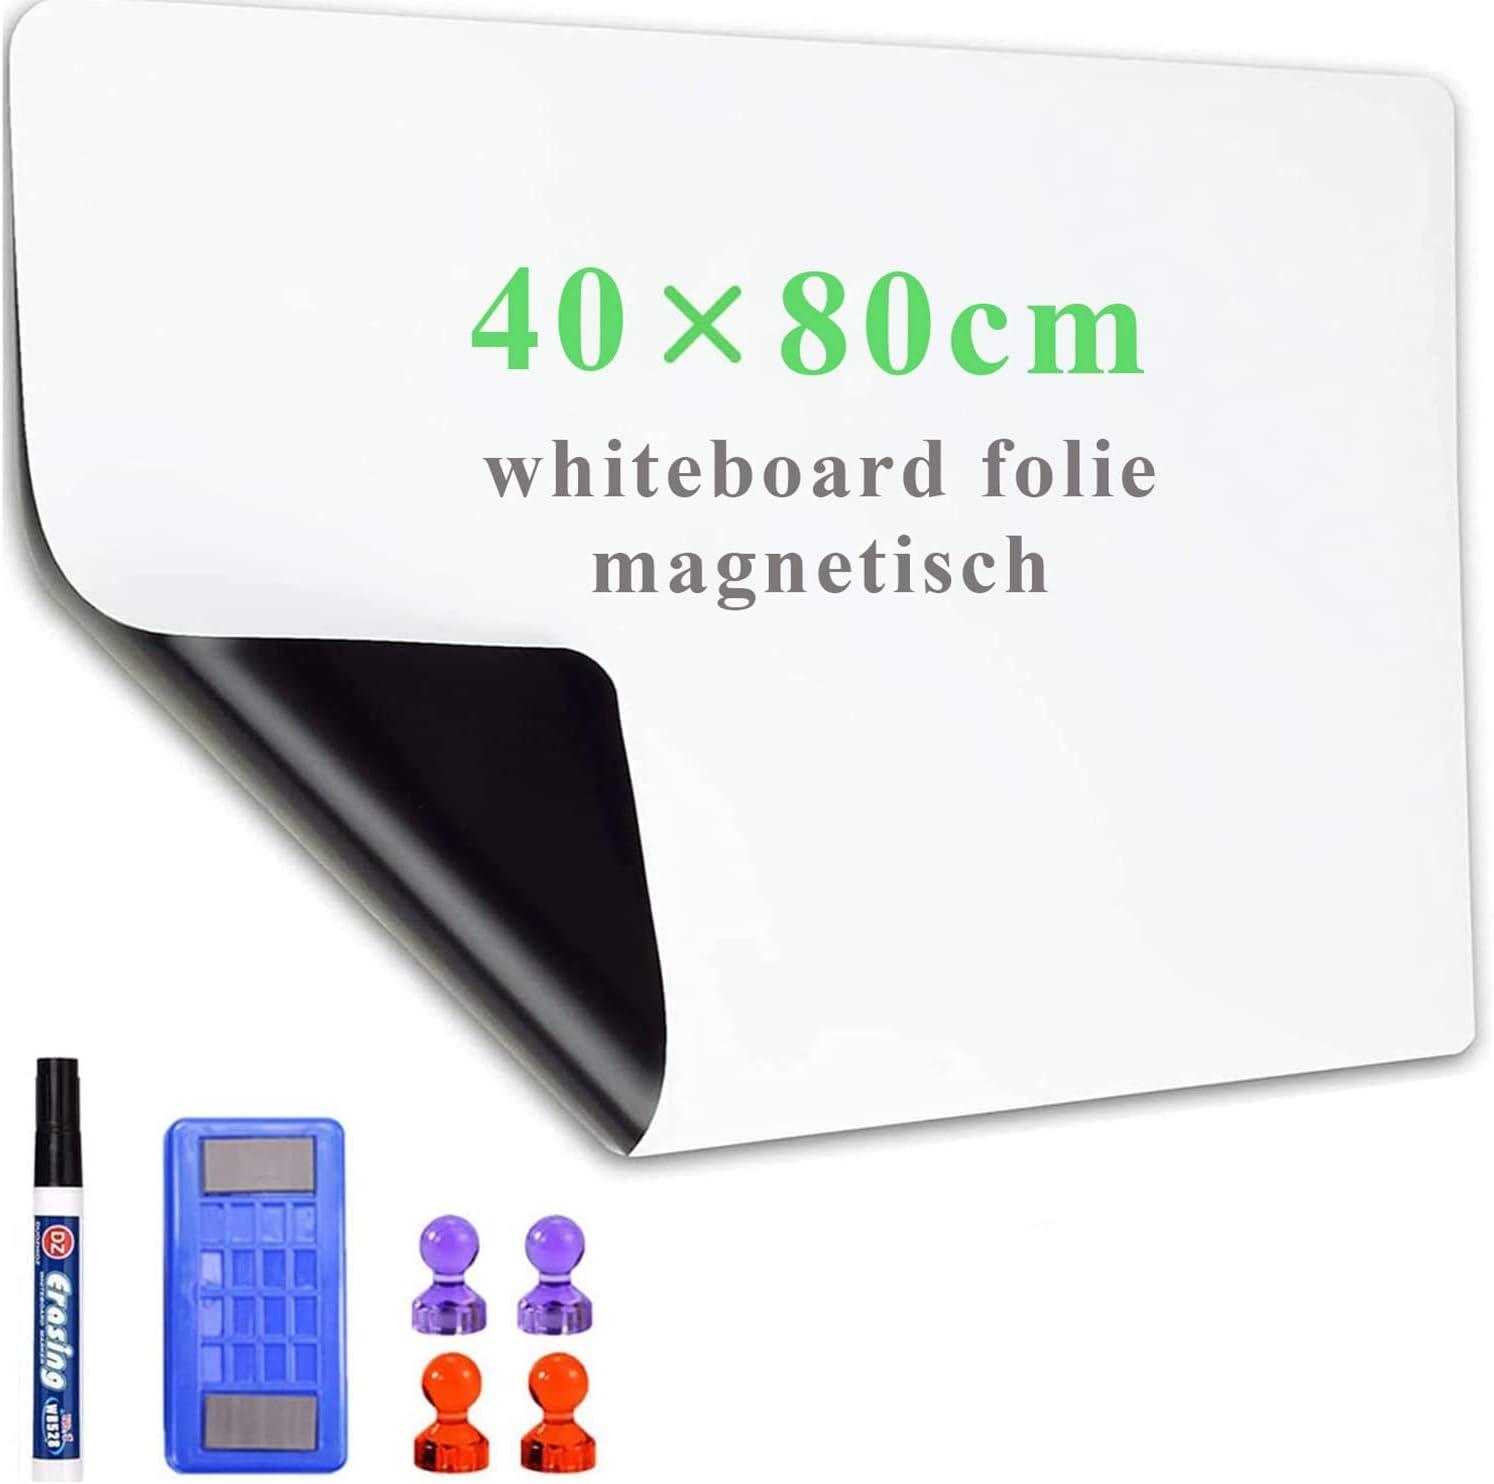 lyzzxi magnetic whiteboard paper 40 x 80cm diy self-adhesive dry erase board sheets whiteboard film stick on